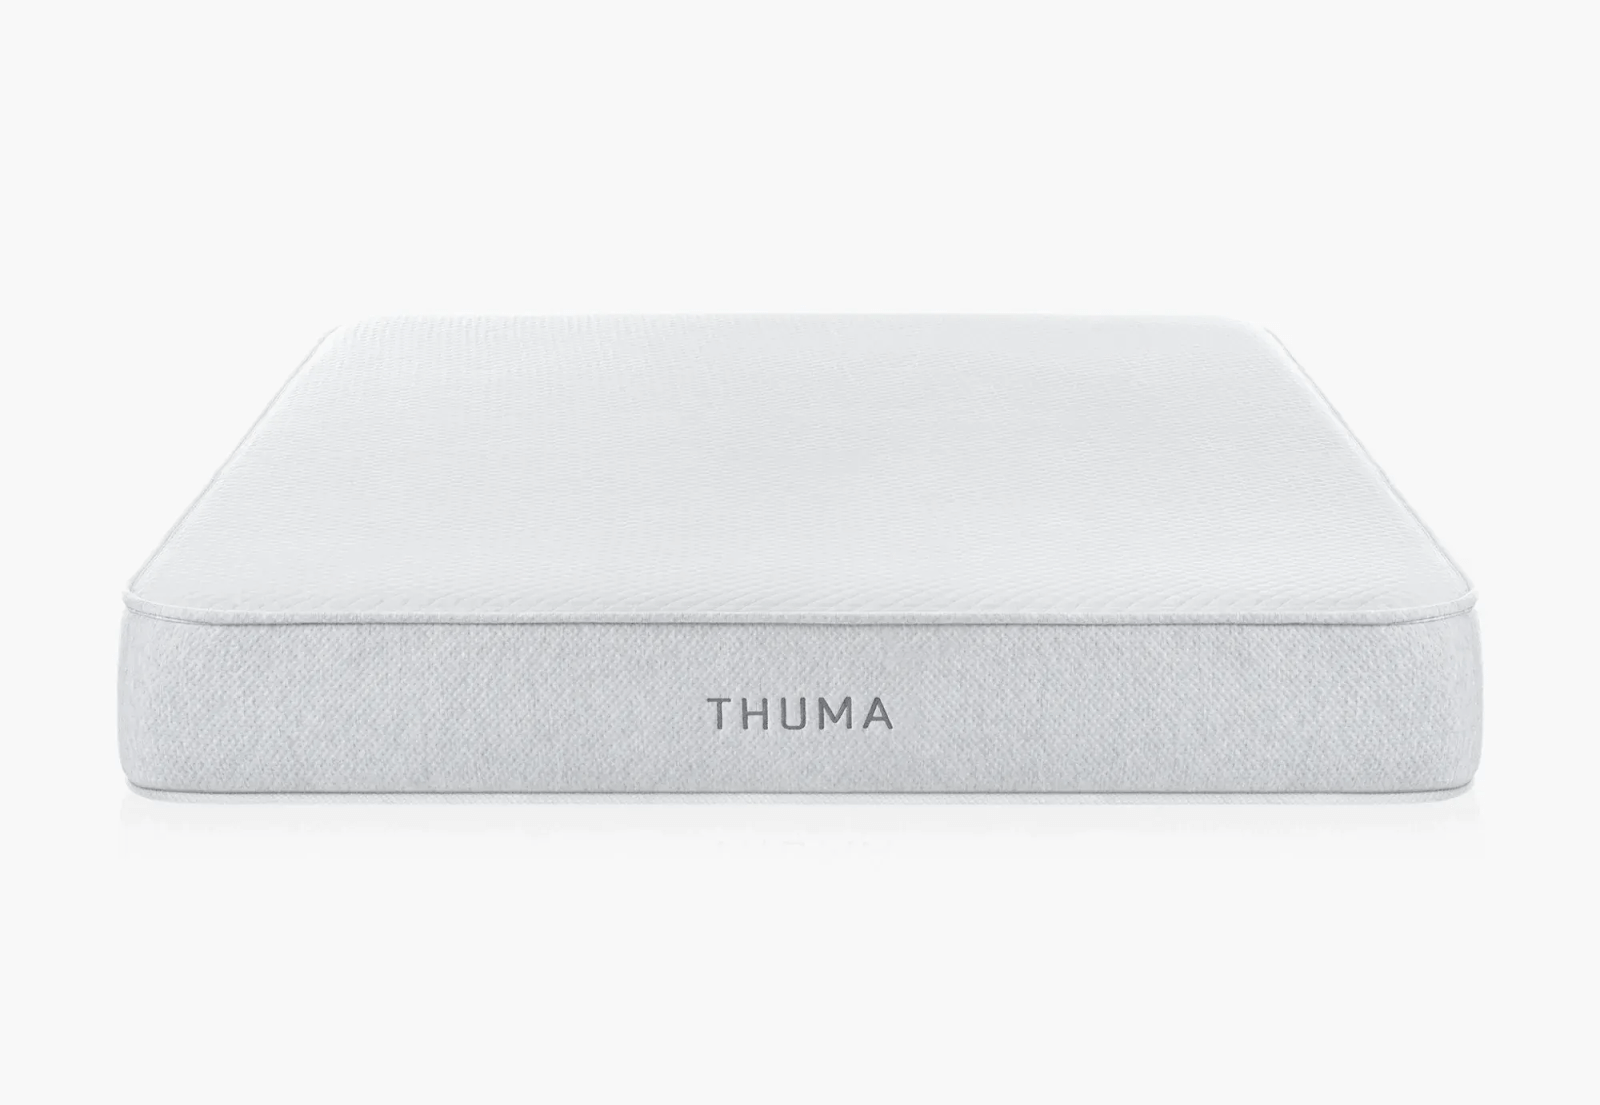 With the Thuma mattress review, you can experience the joy of rest.